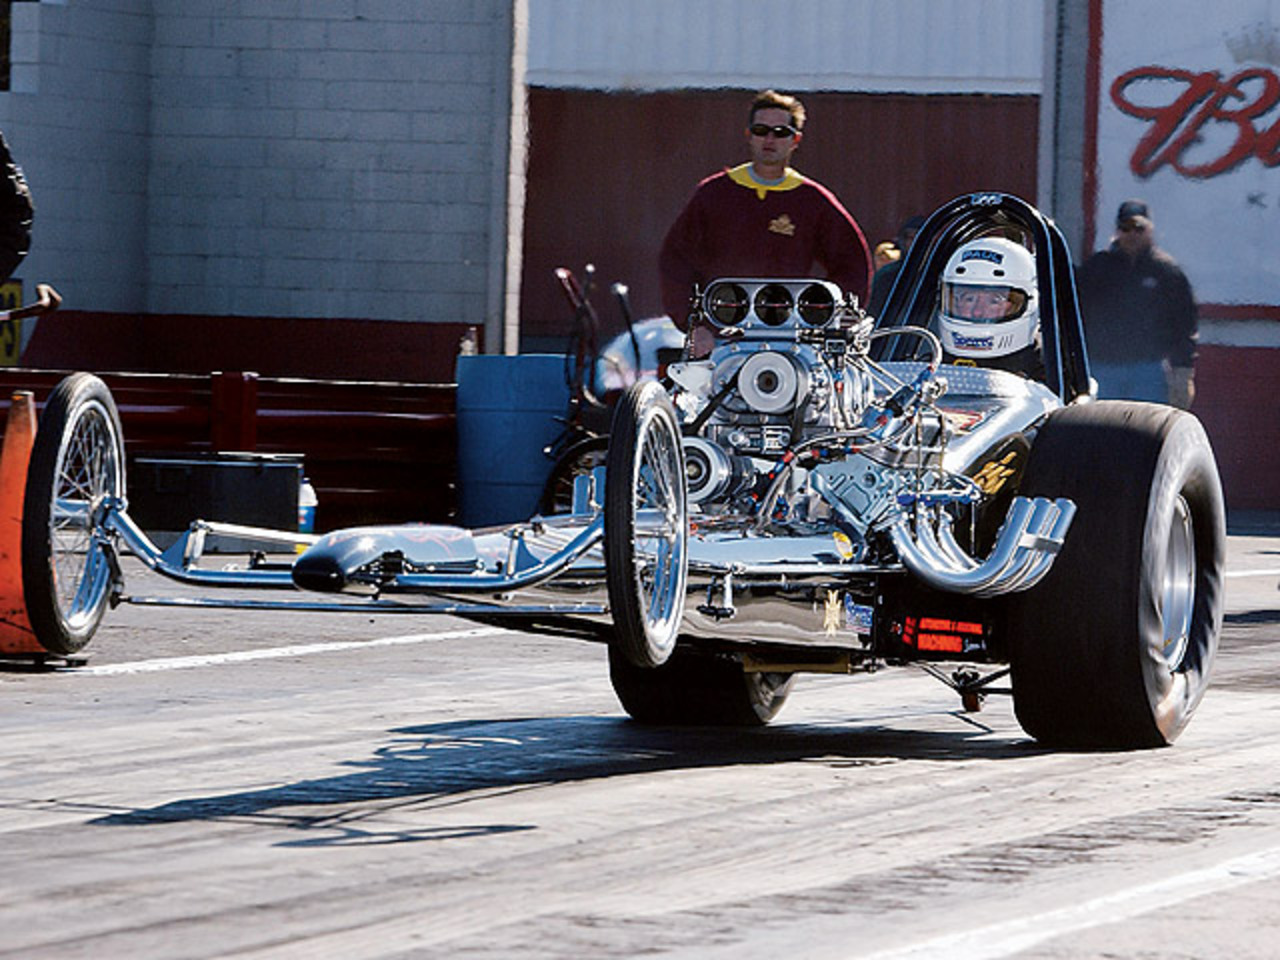 Dragster Front View At Track Photo 2.